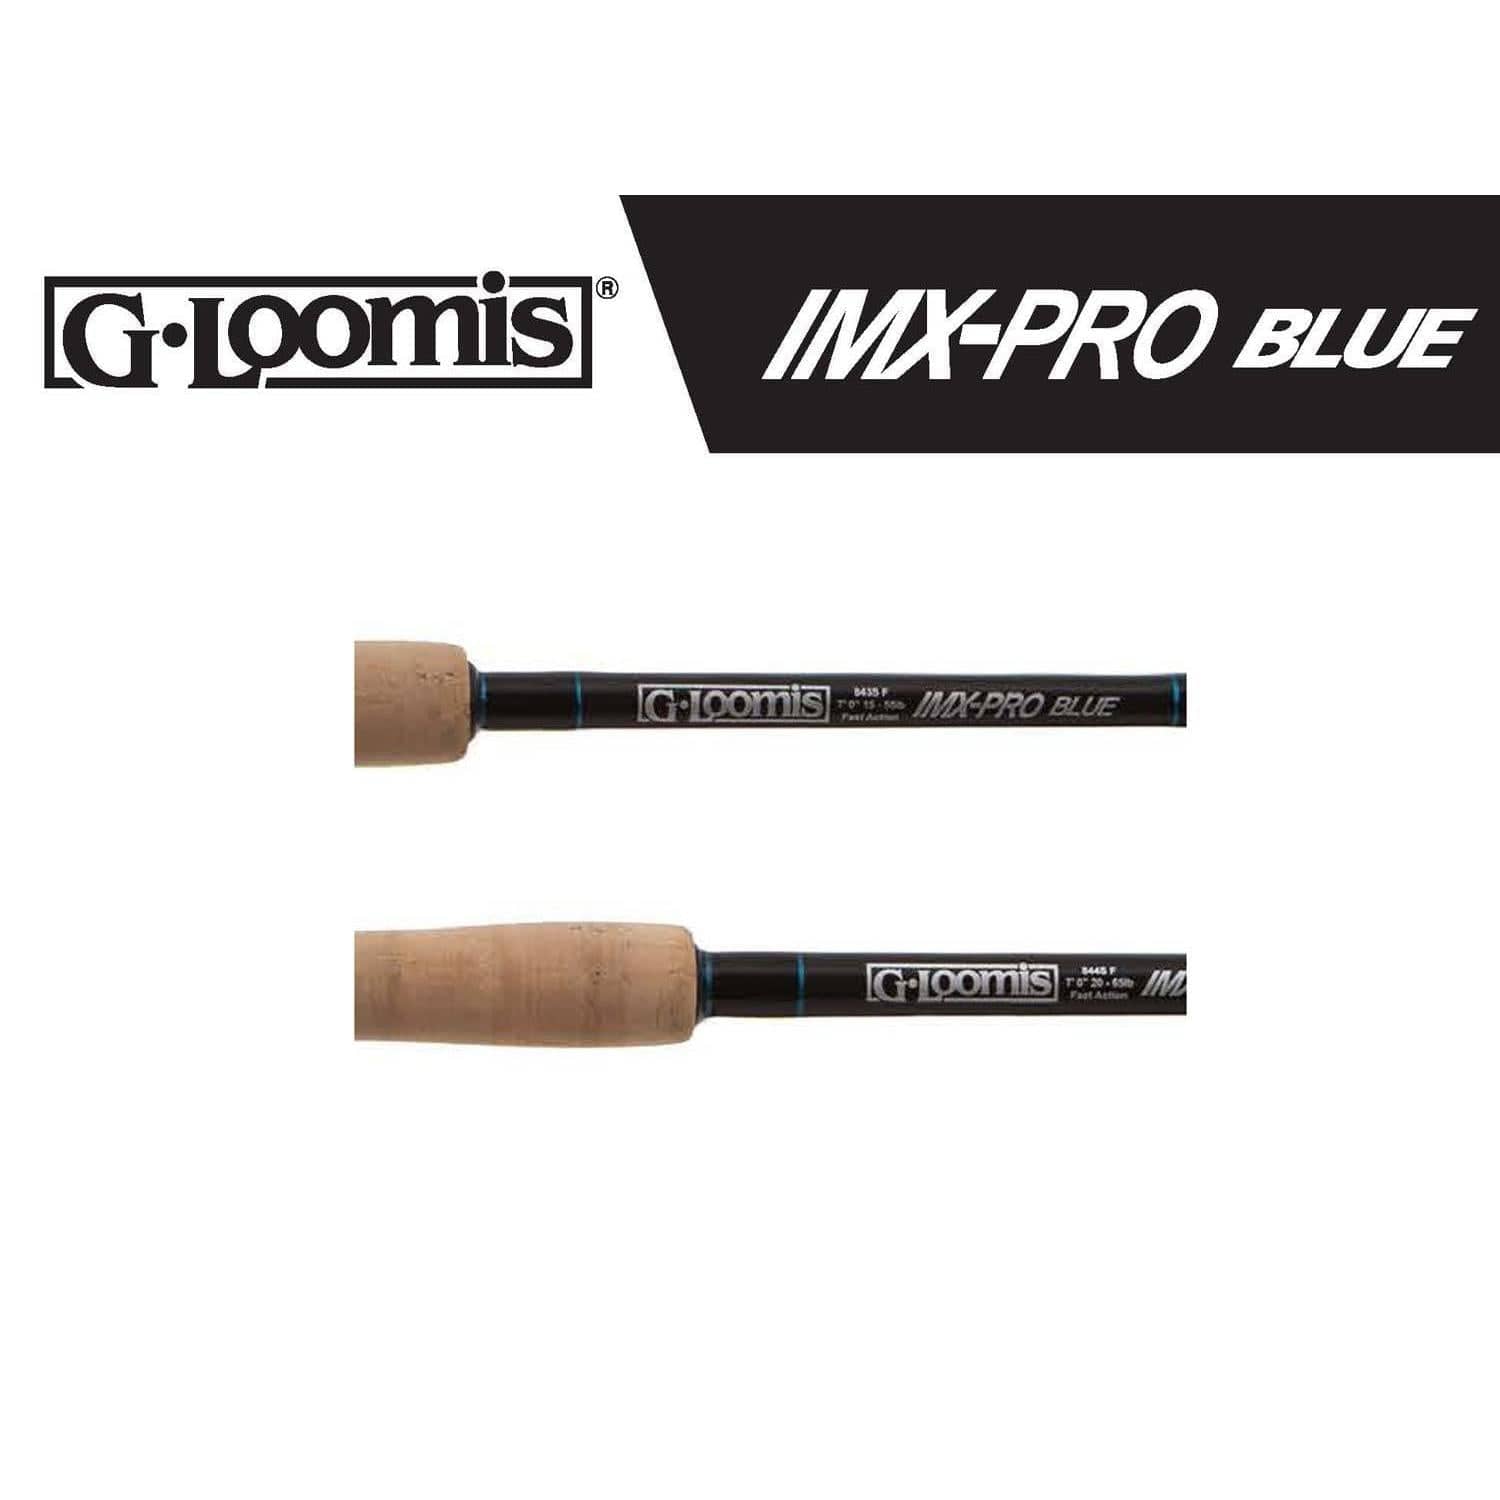 G-Loomis IMX Pro Blue Series Spinning Rods – Capt. Harry's Fishing Supply